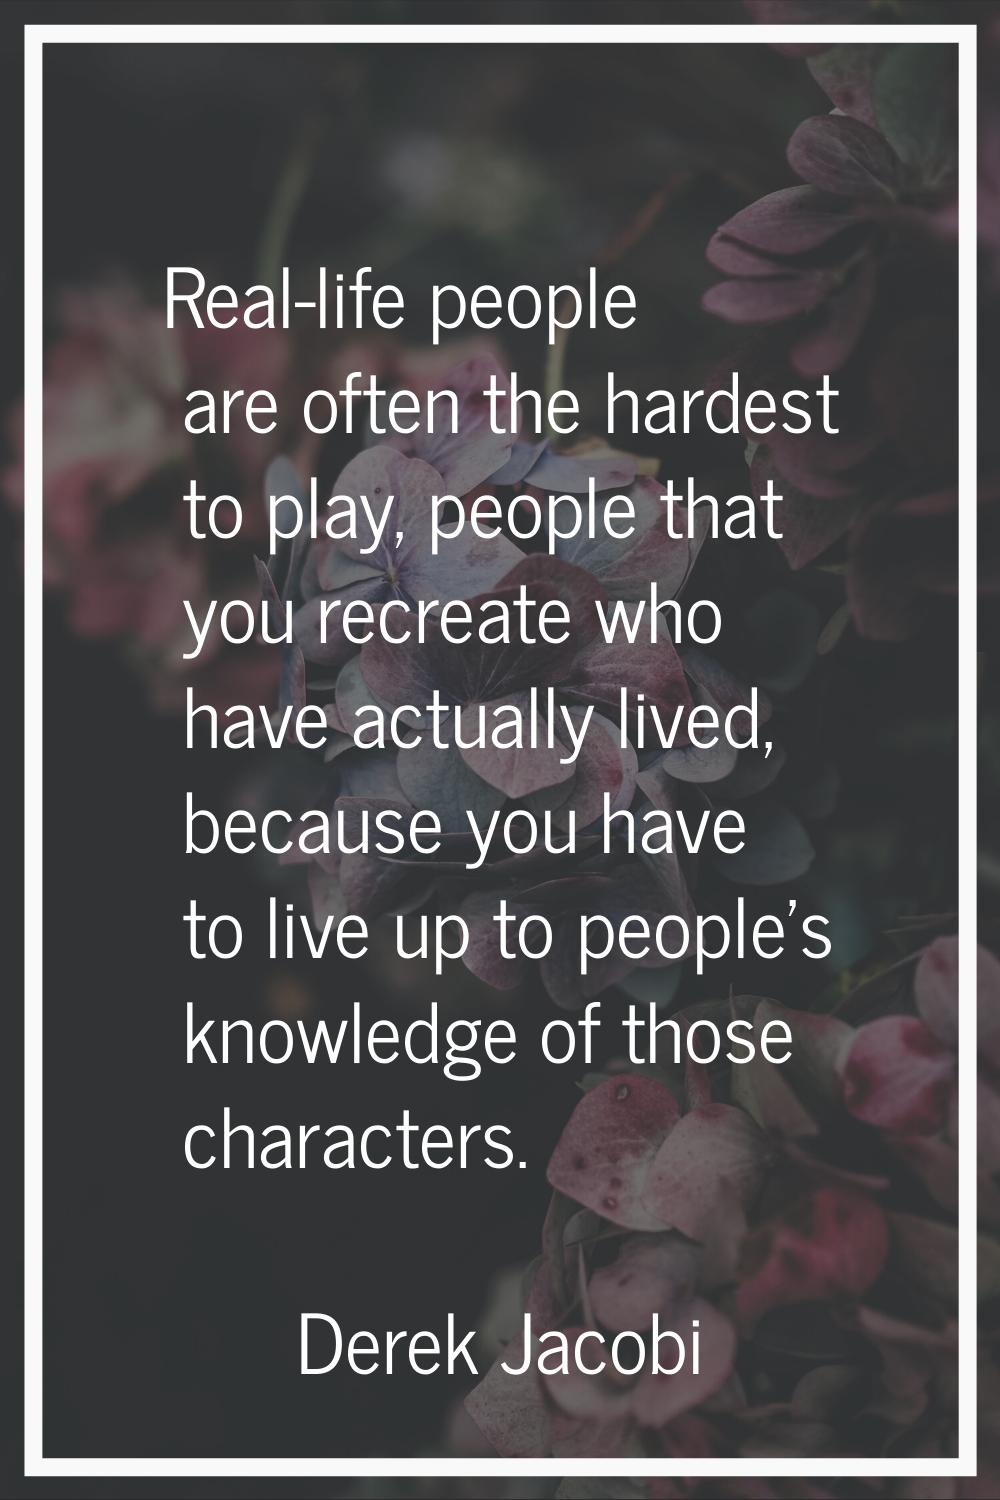 Real-life people are often the hardest to play, people that you recreate who have actually lived, b